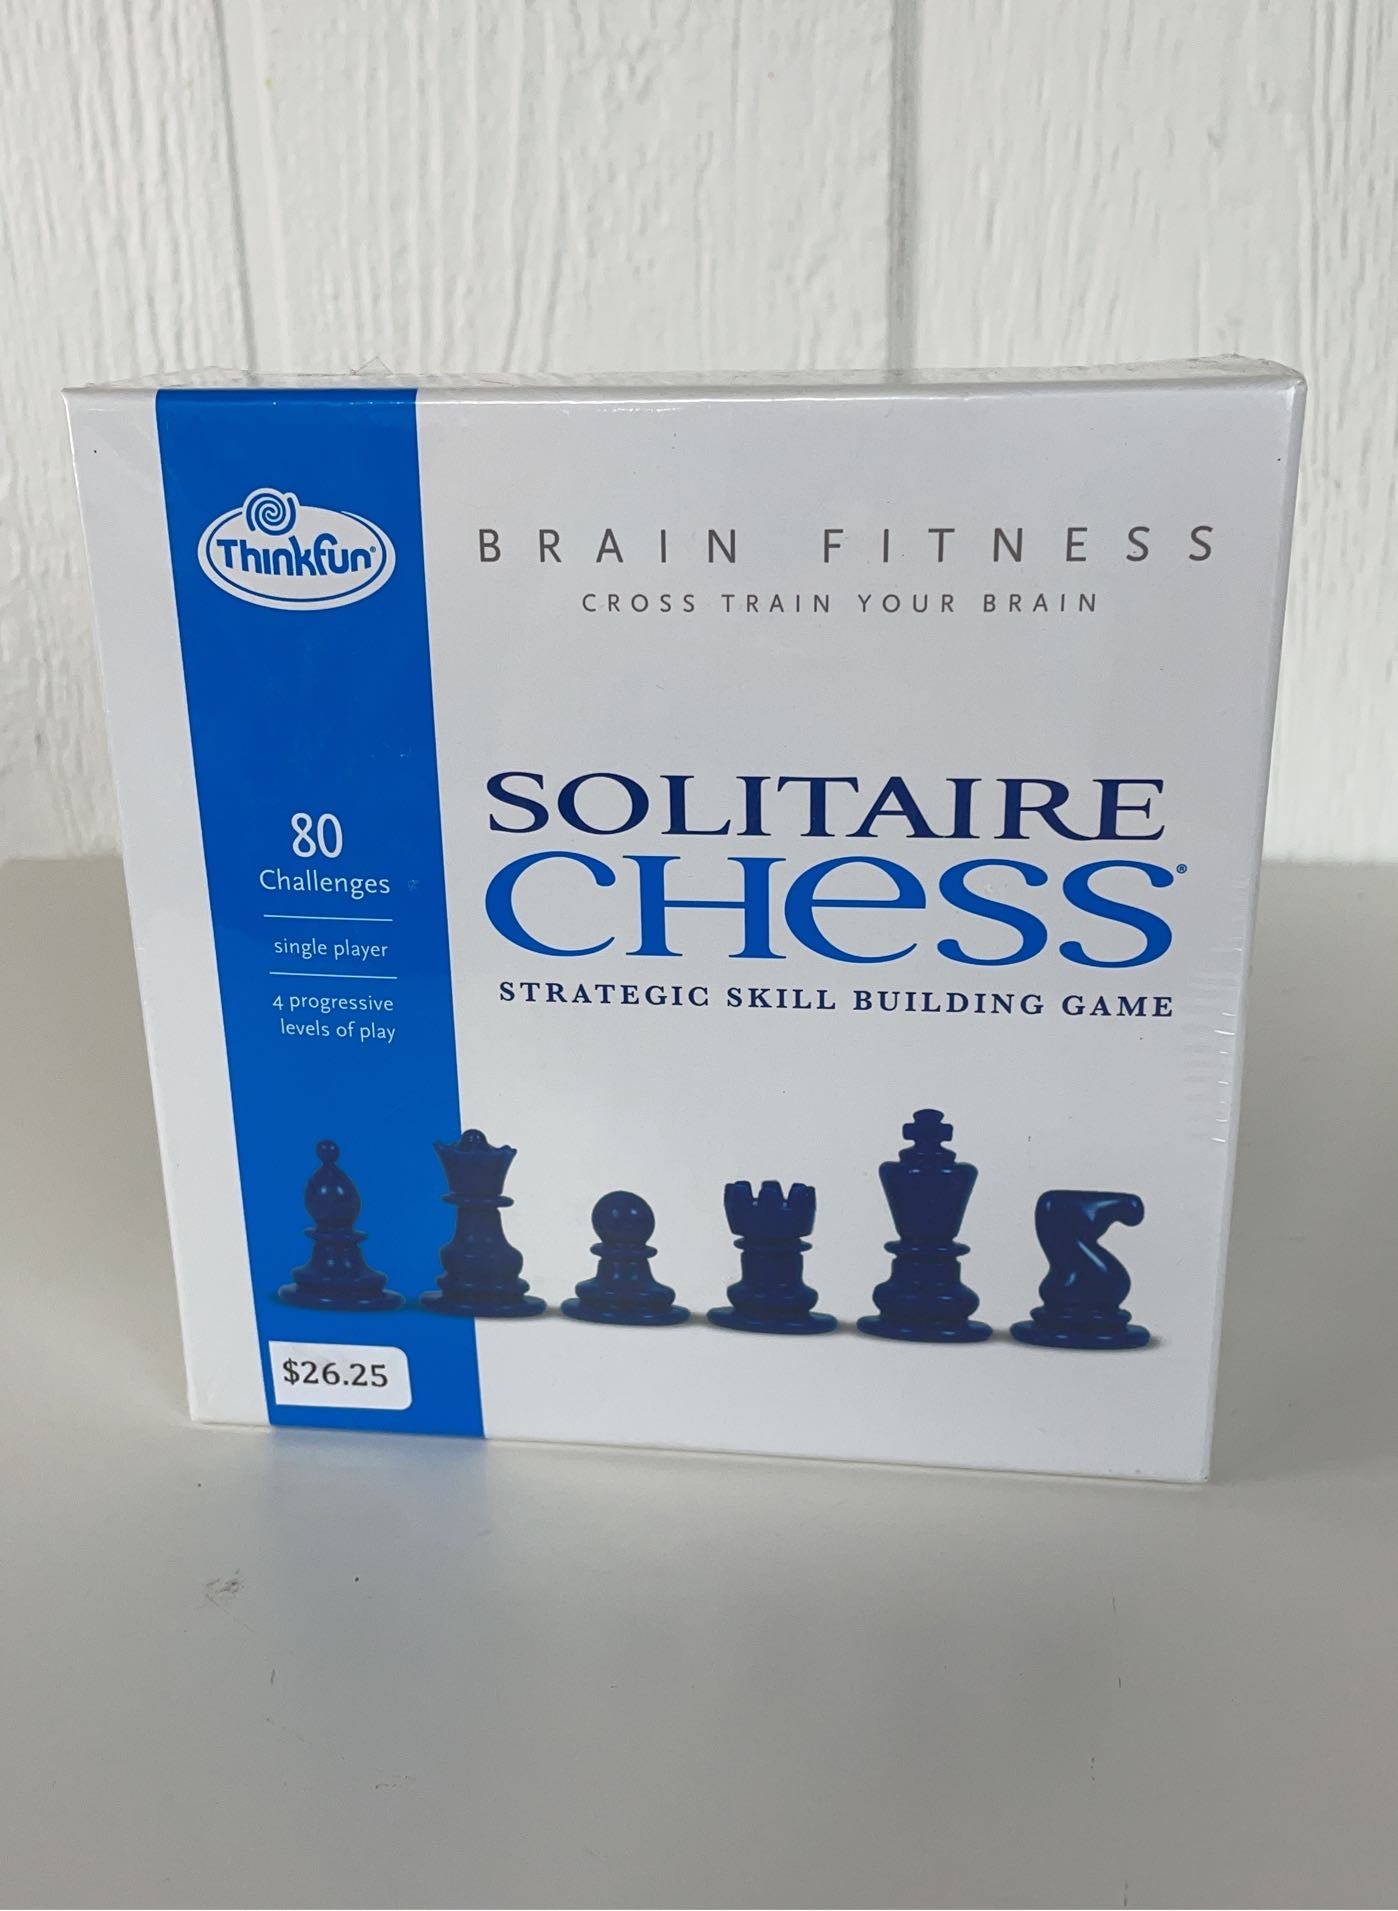 Brain Fitness Solitaire Chess™